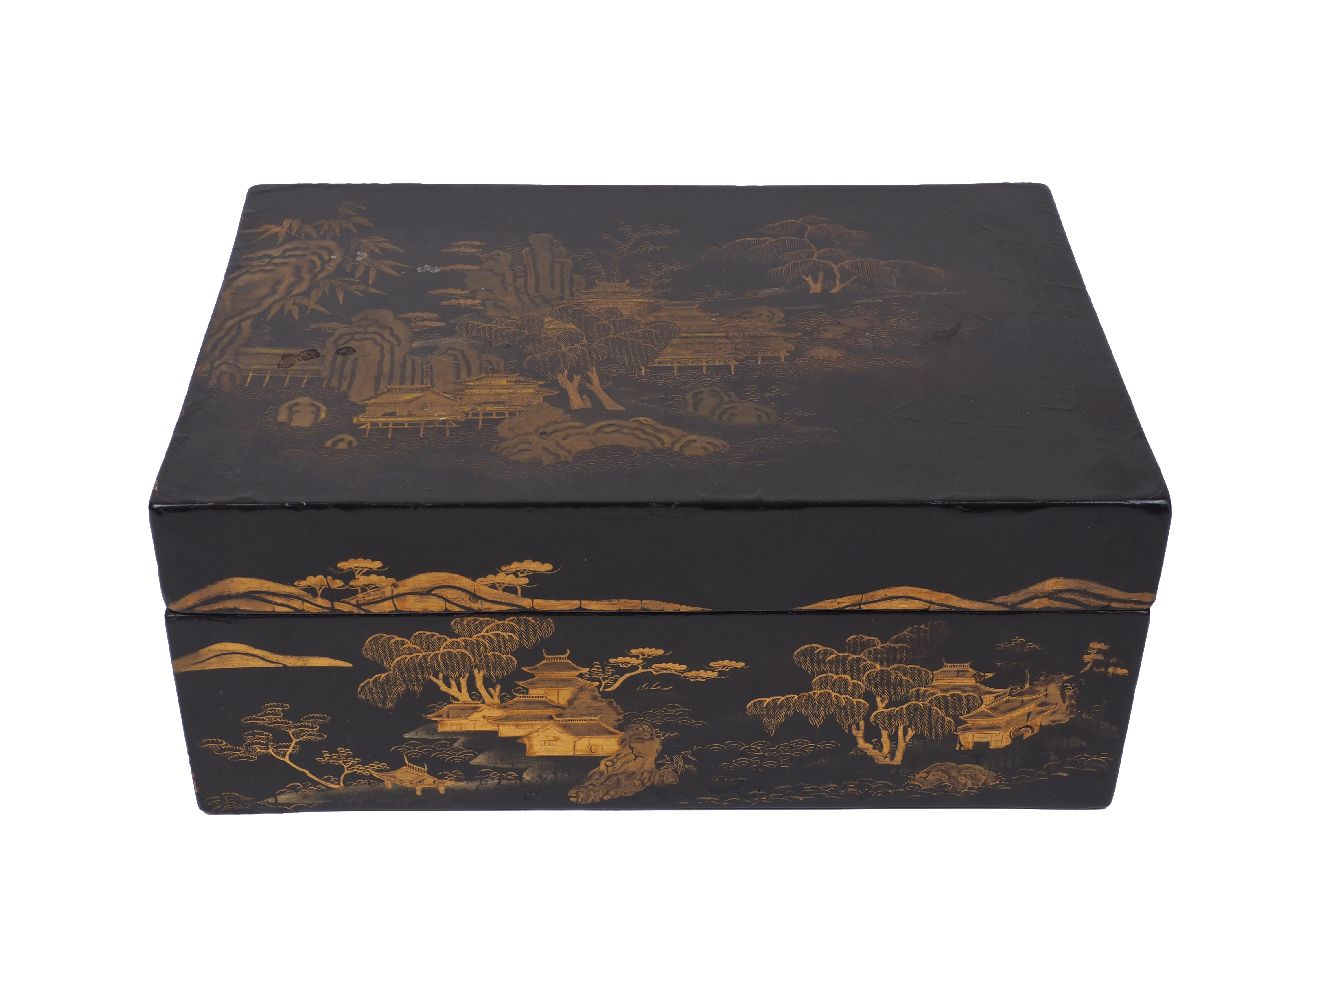 A Chinese black lacquer and gilt decorated box and cover, late 19th century, the exterior with